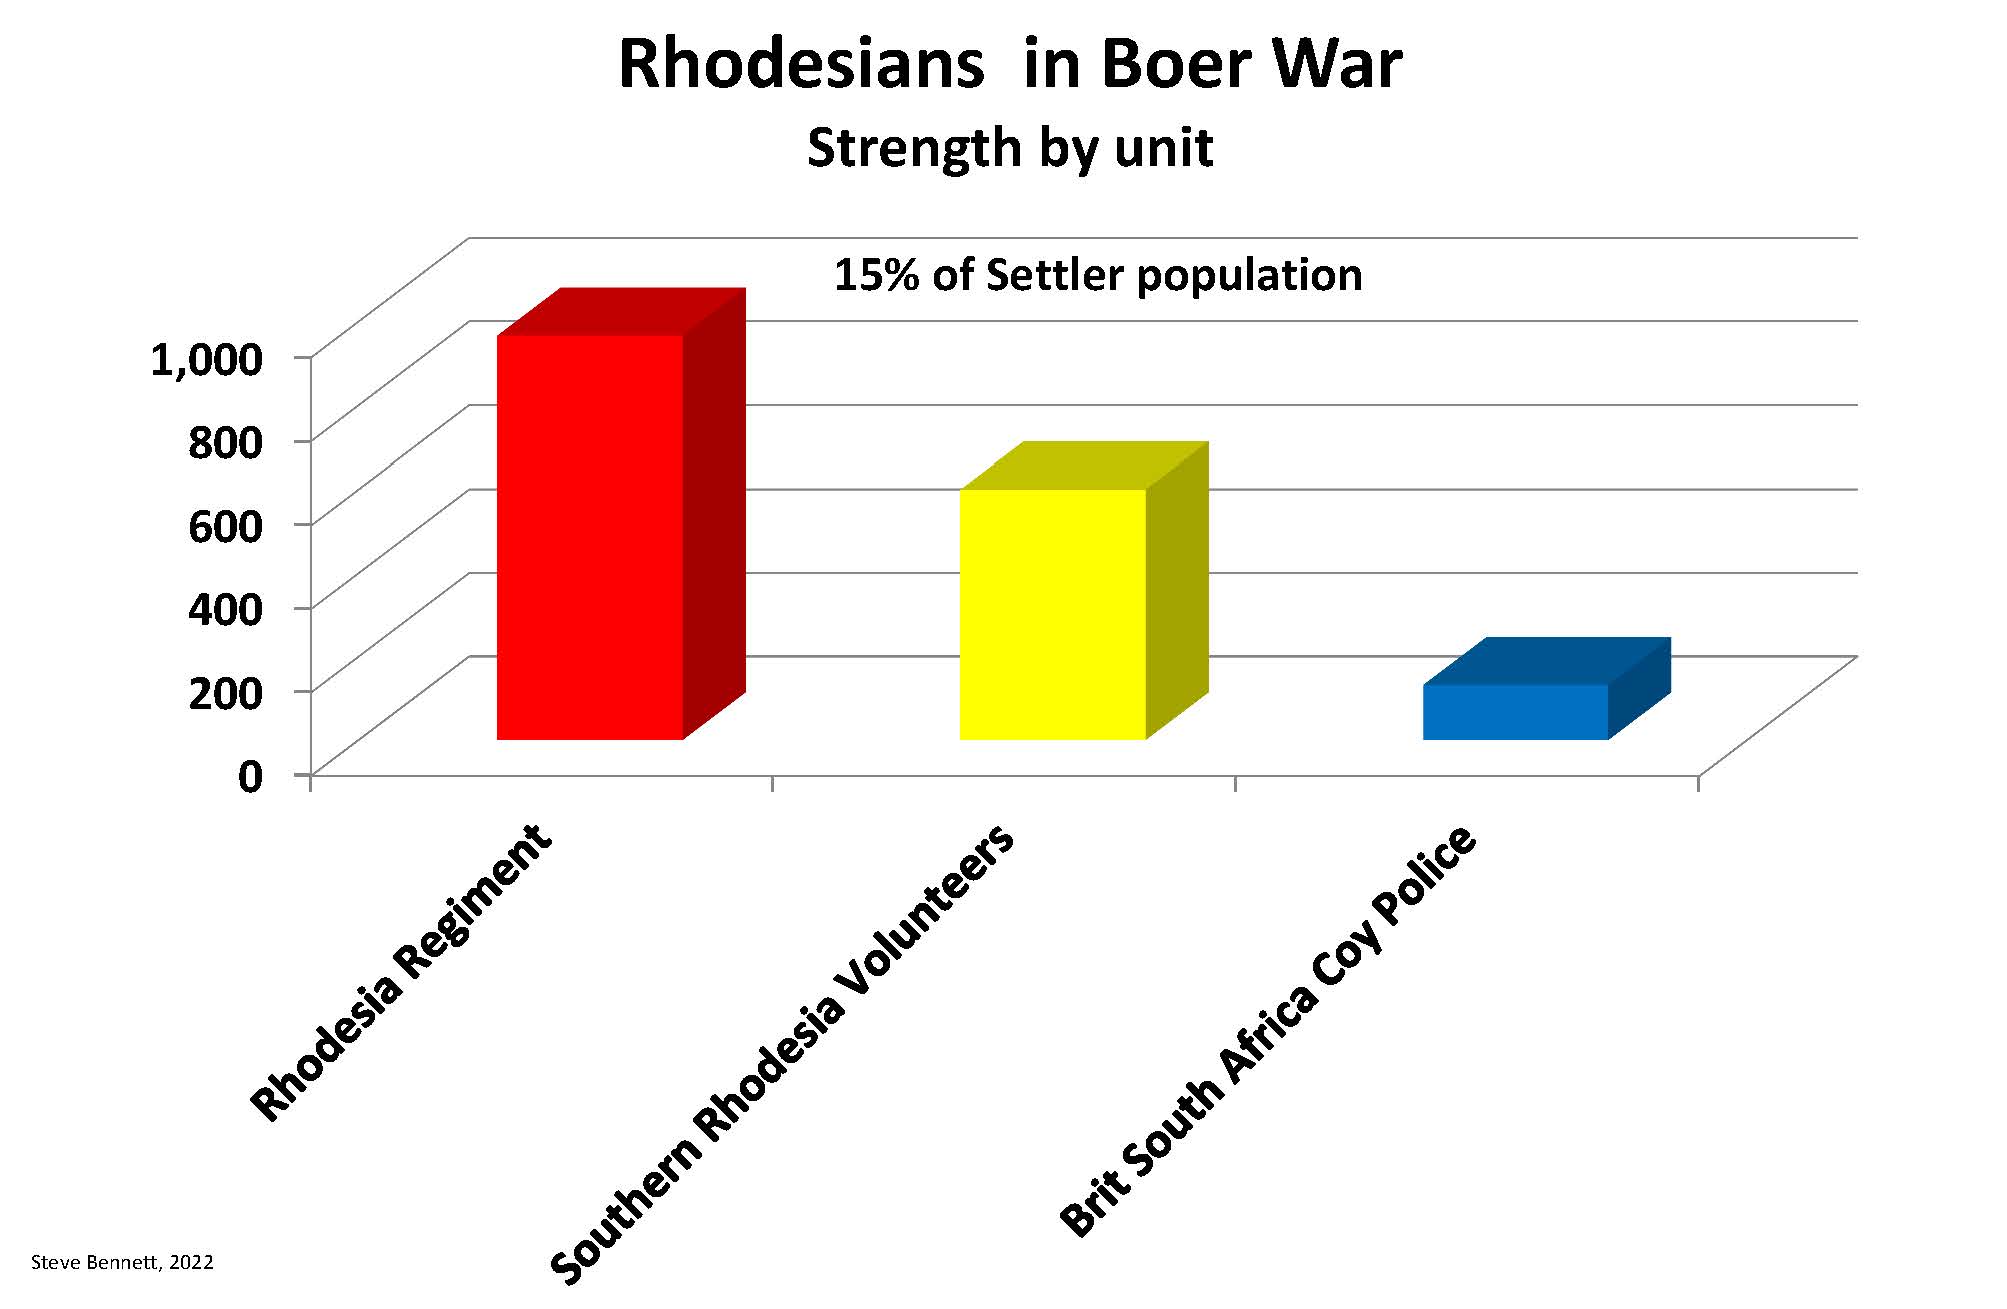 Chart showing units of Rhdesian forces that fought in Boer War